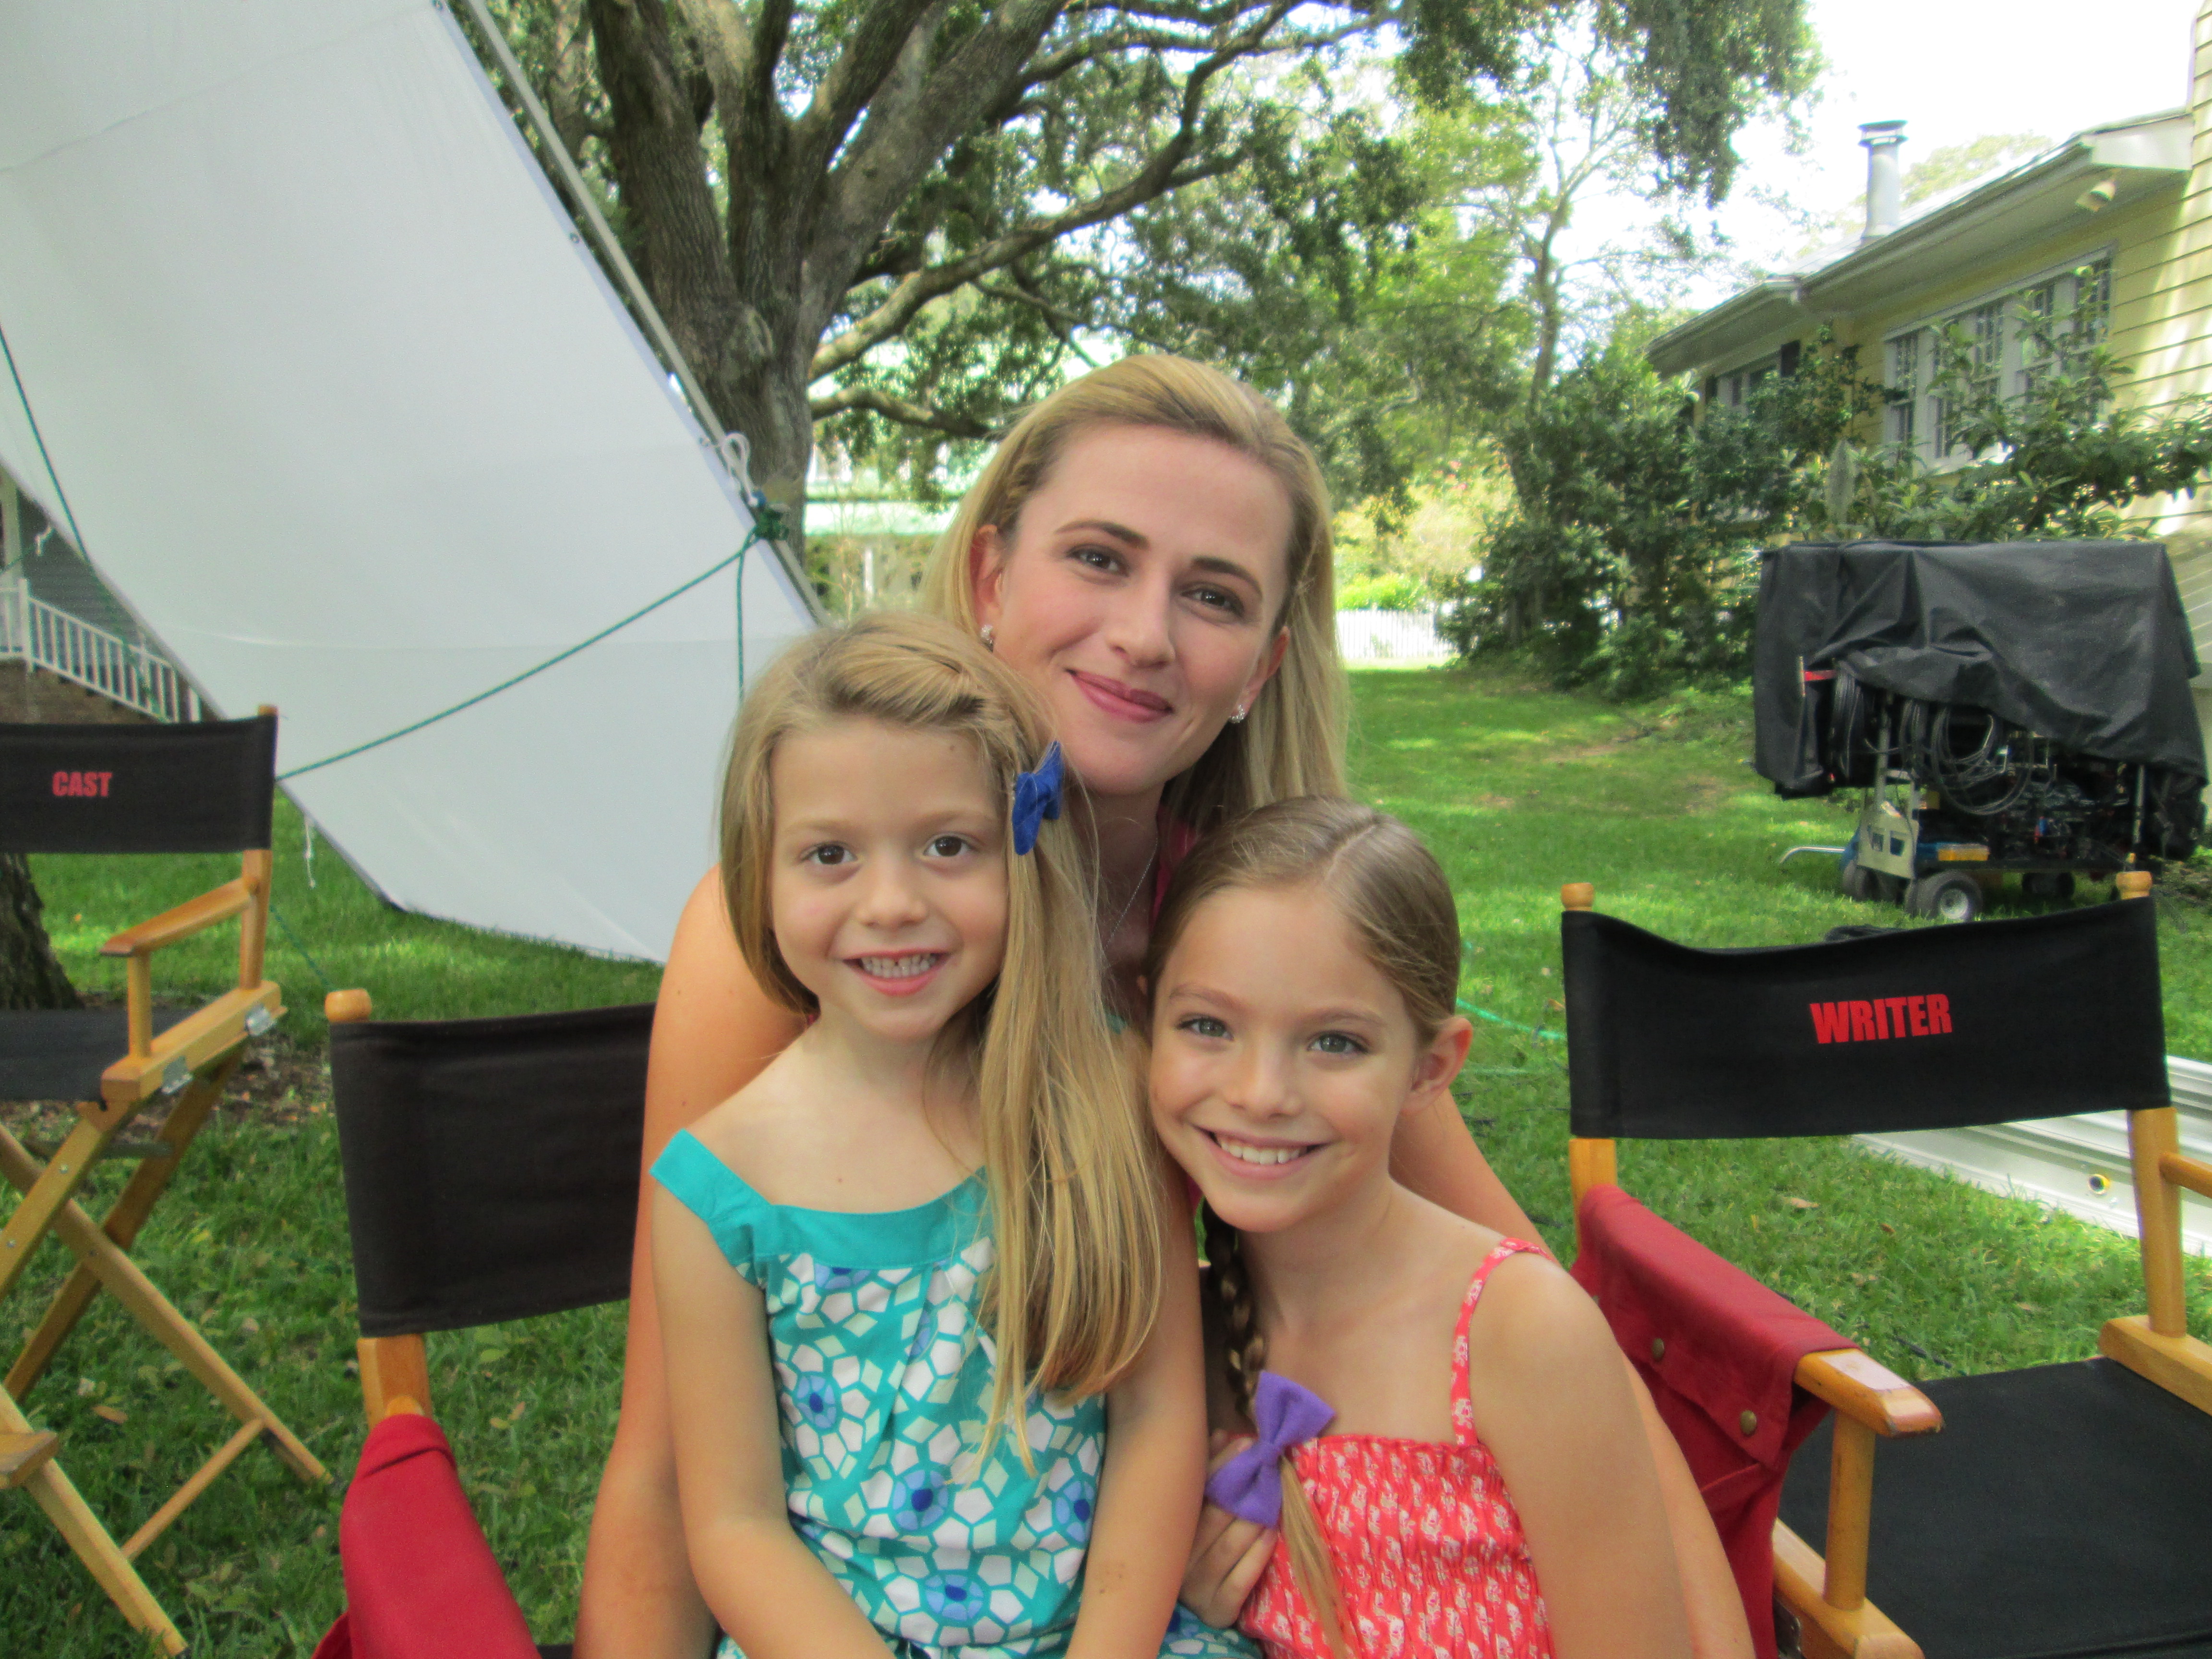 Chloe Perrin, Isabel Myers and Megan Ketch on the set of Reckless.